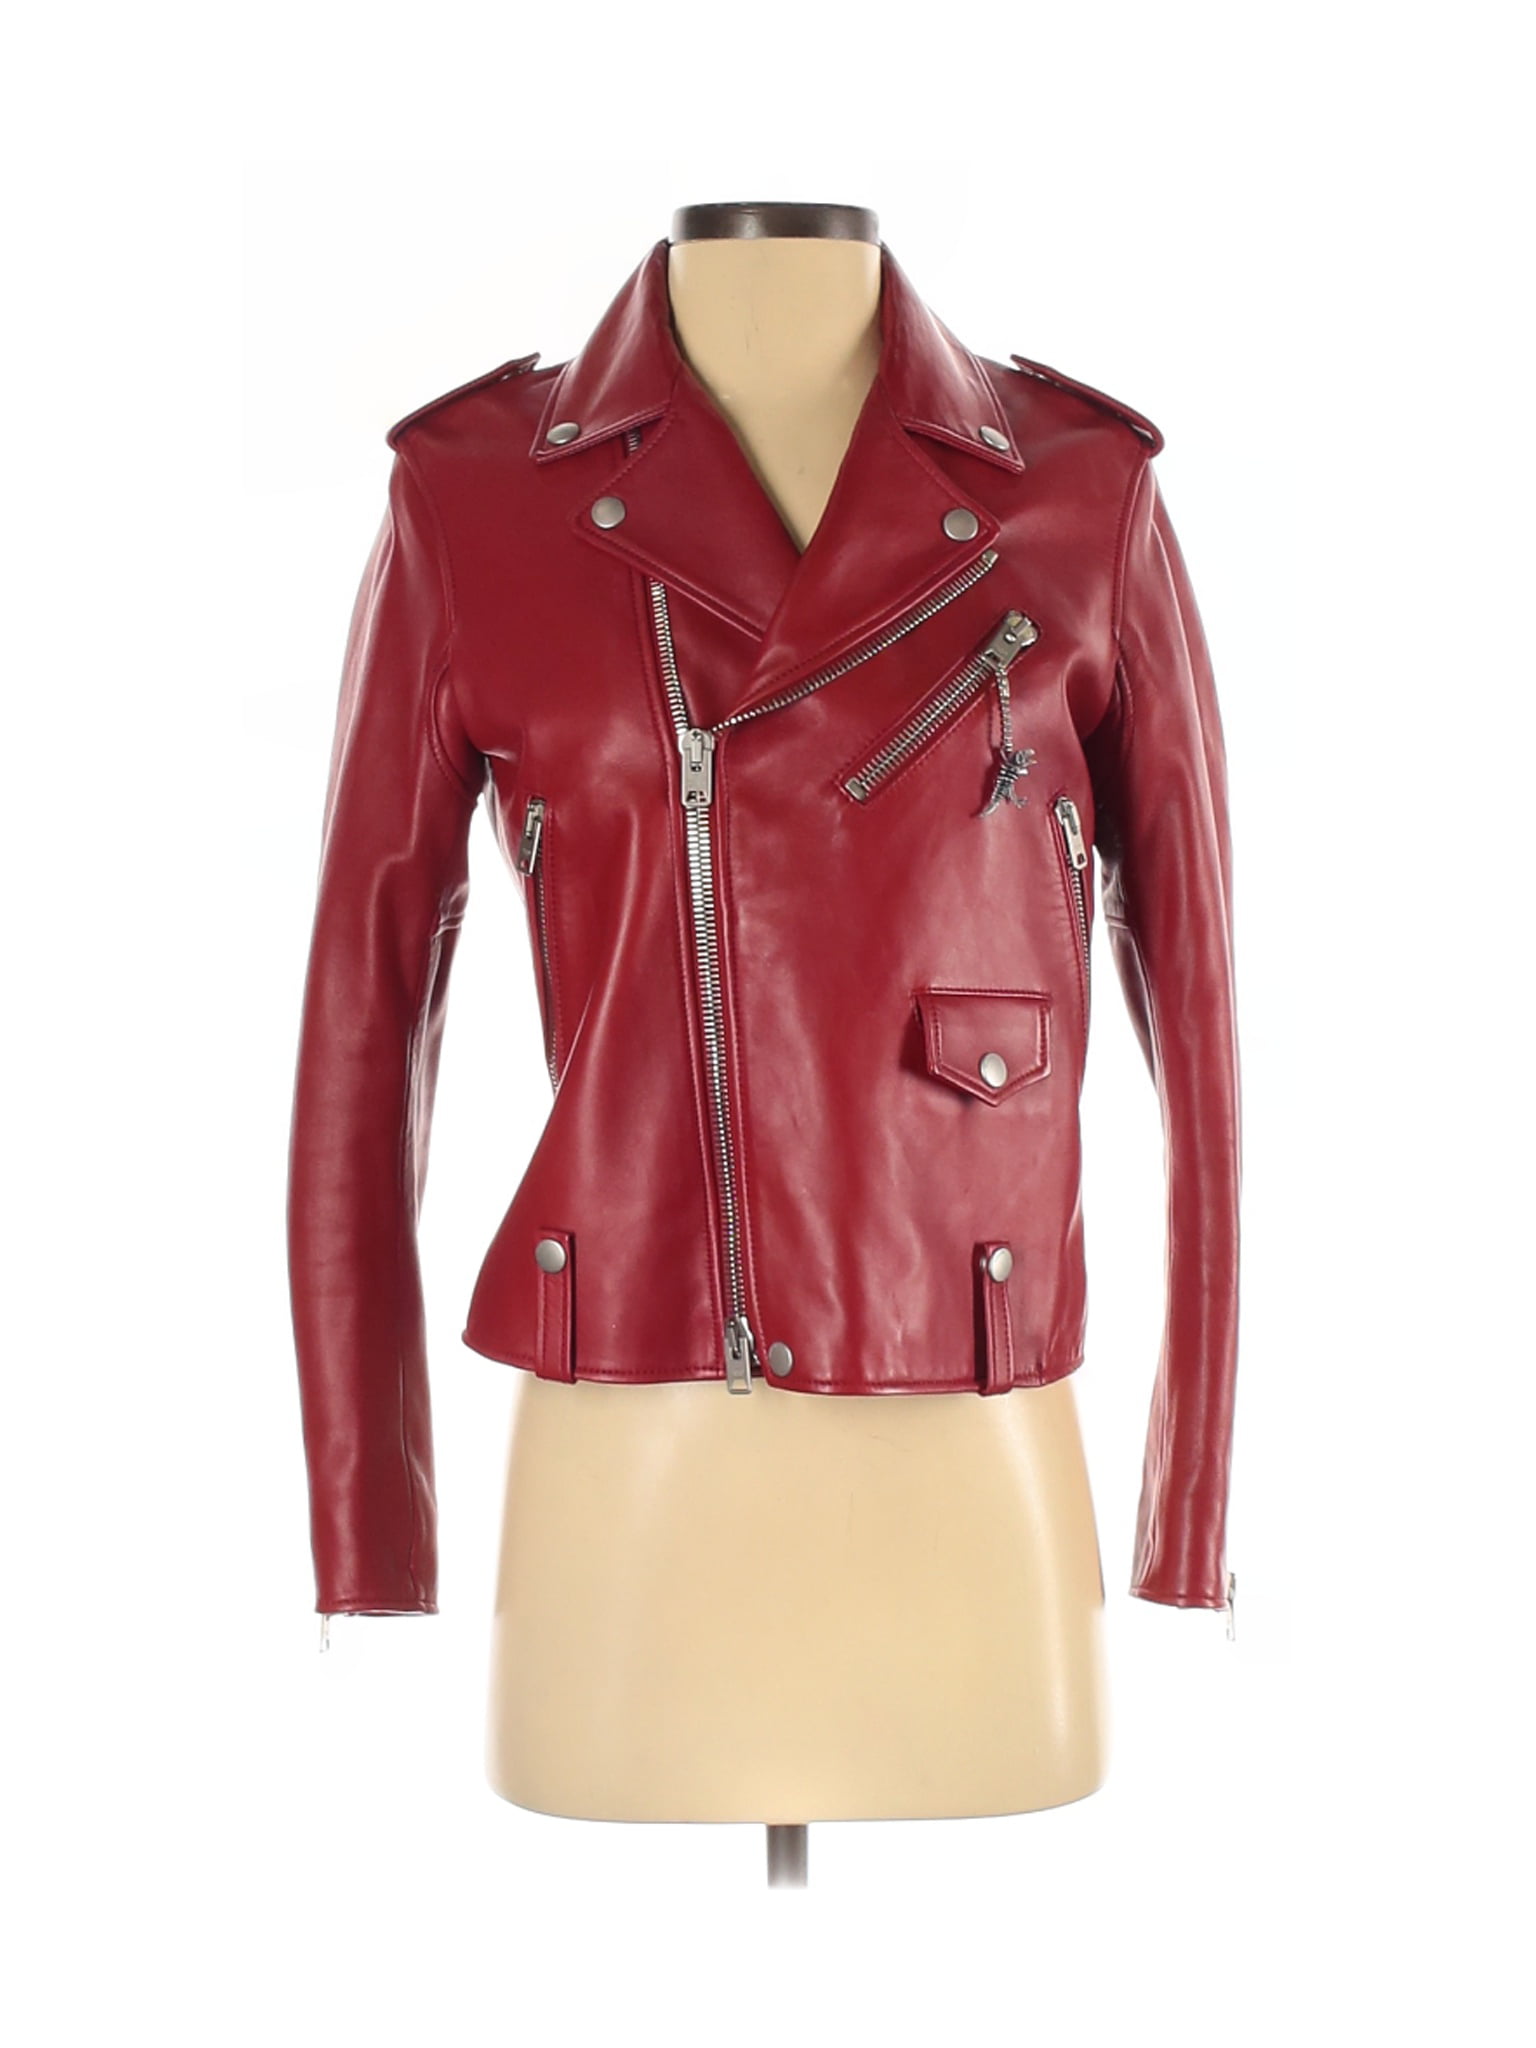 Coach 1941 - Pre-Owned Coach 1941 Women's Size 2 Leather Jacket ...